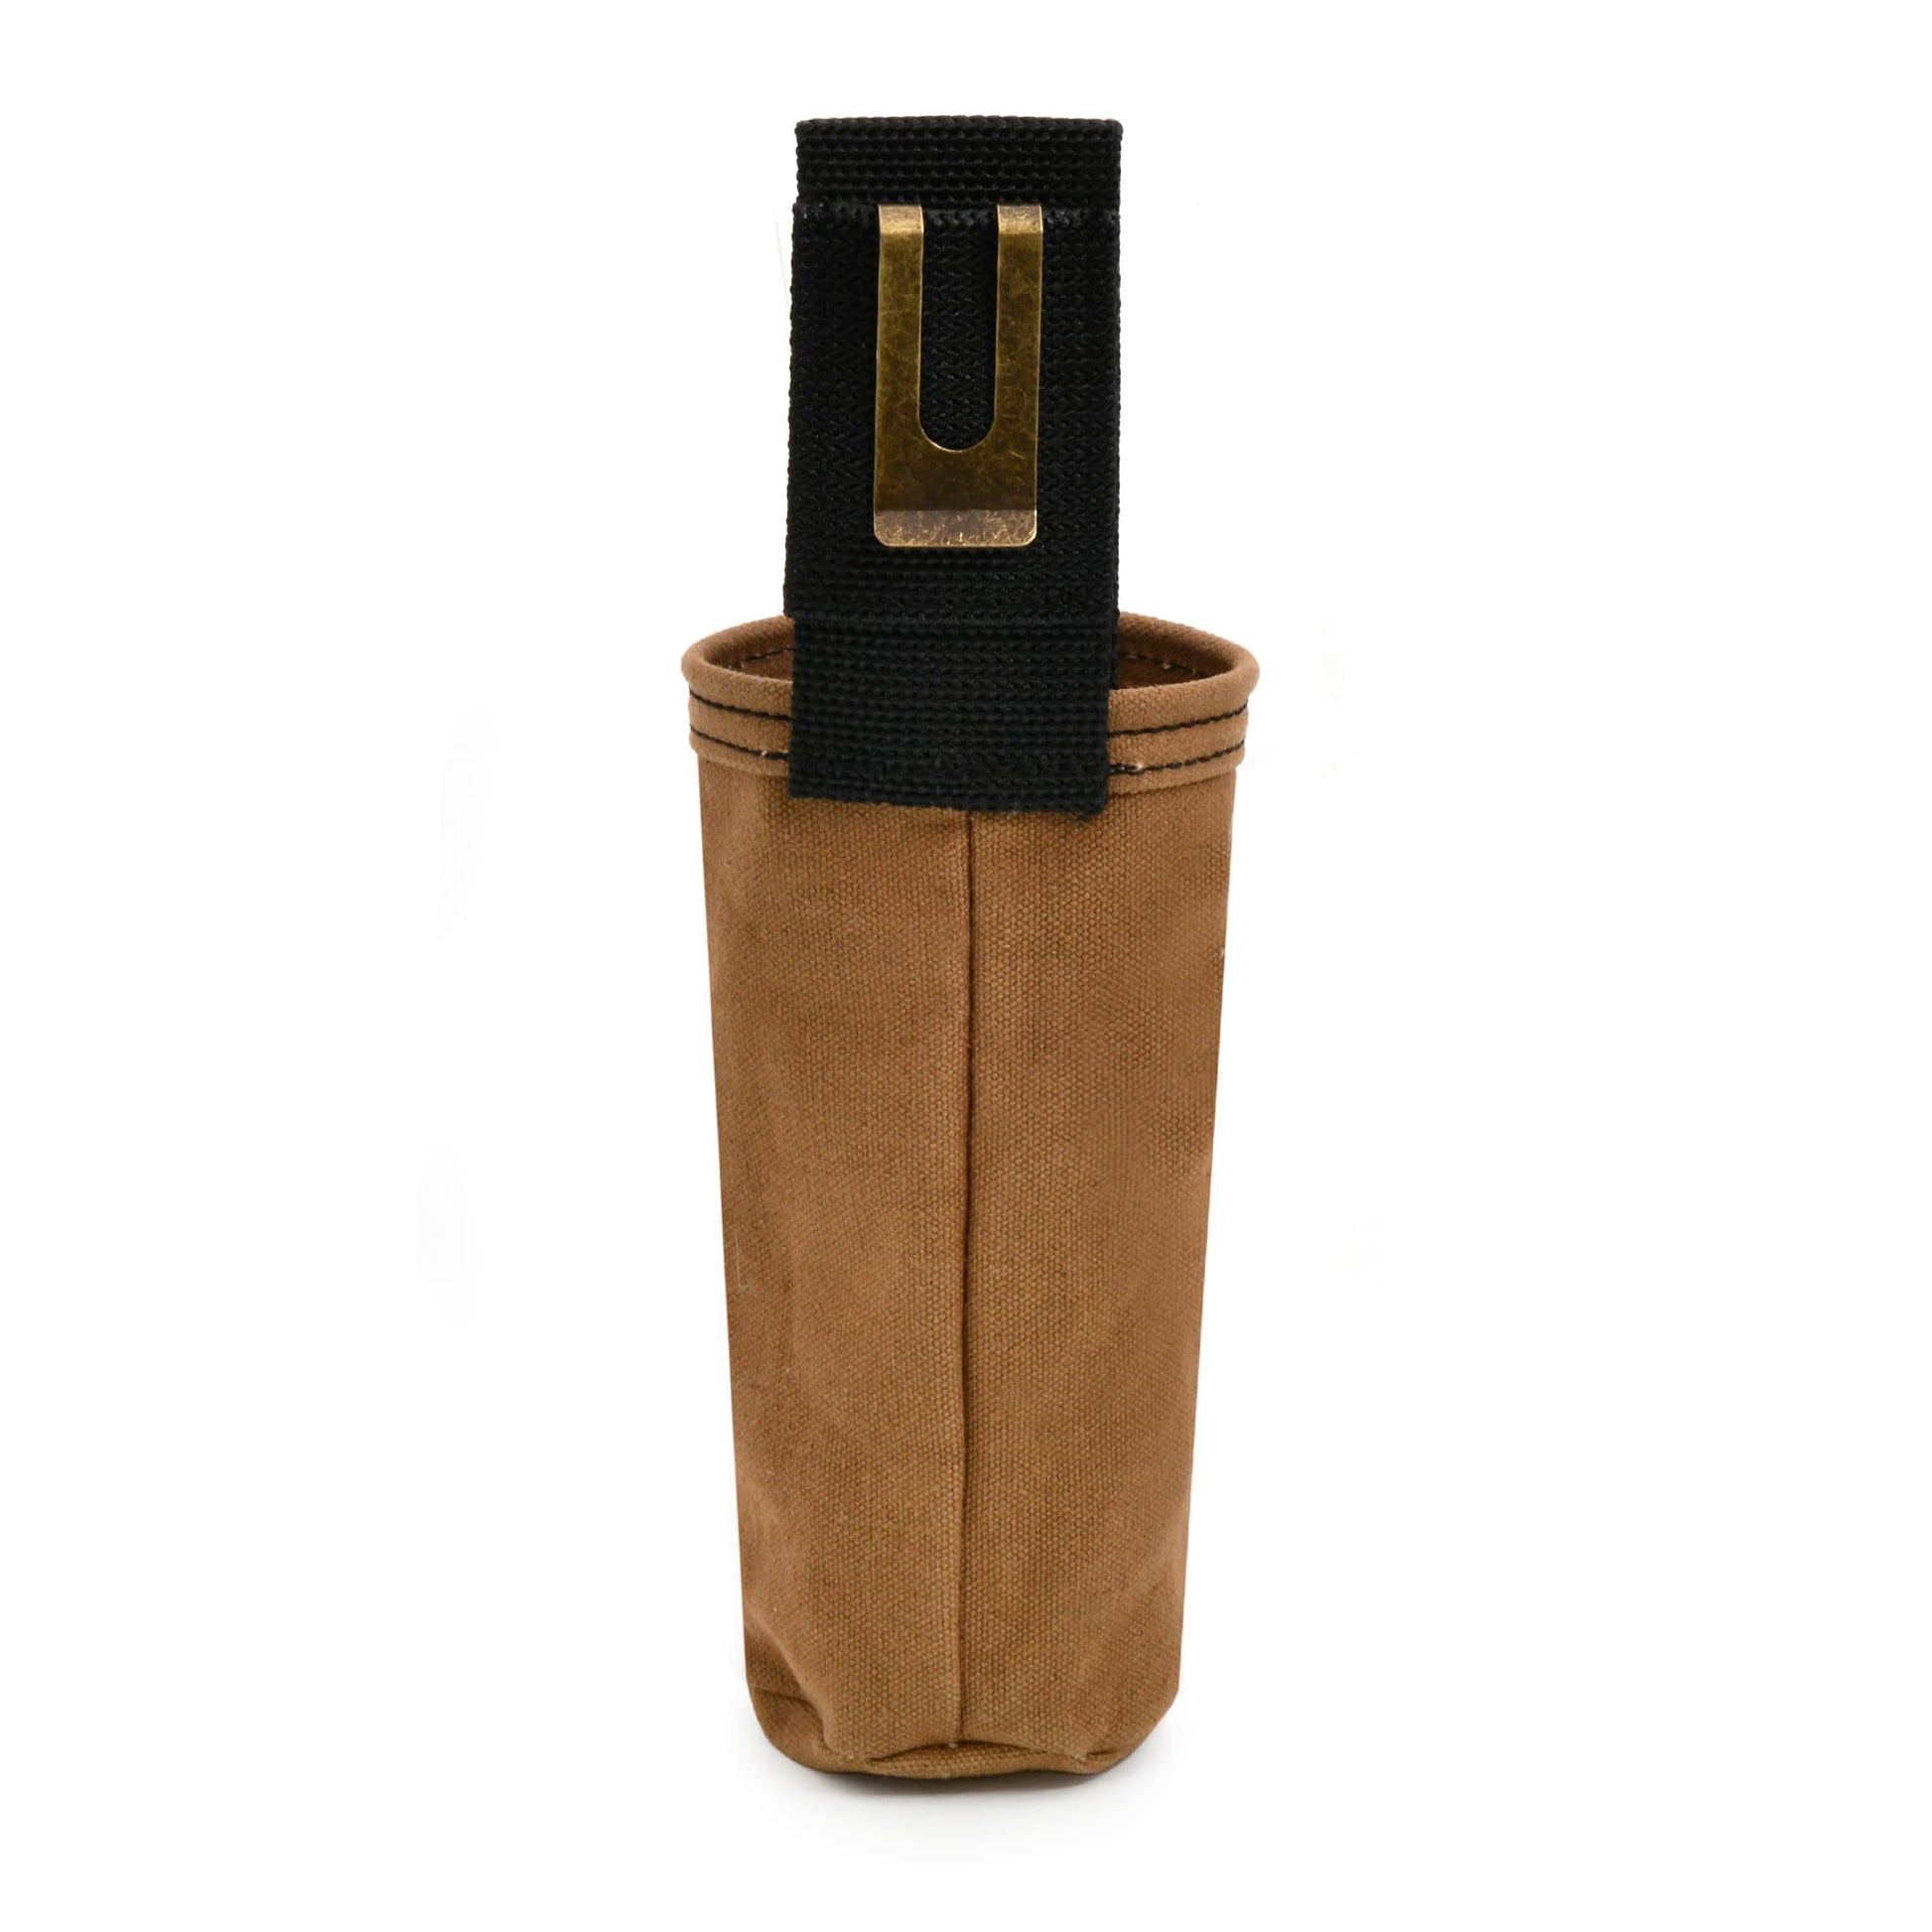 Style n Craft 97022 - Spray Paint Can Holder in Heavy Duty Brown Waterproof Canvas - back view showing the metal clip for belt attachment